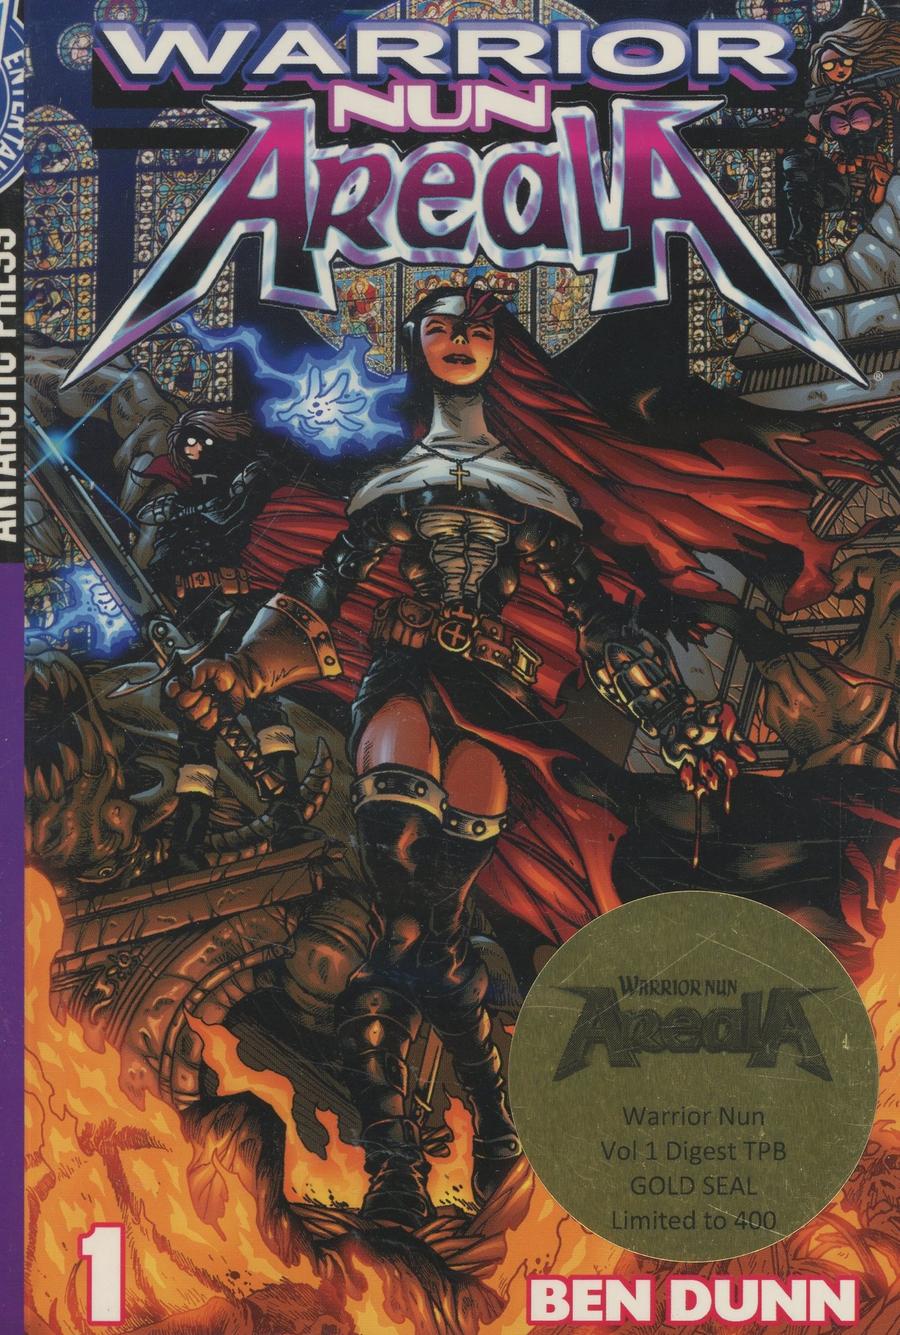 Warrior Nun Areala Digest Vol 1 TP Gold Seal Variant Cover